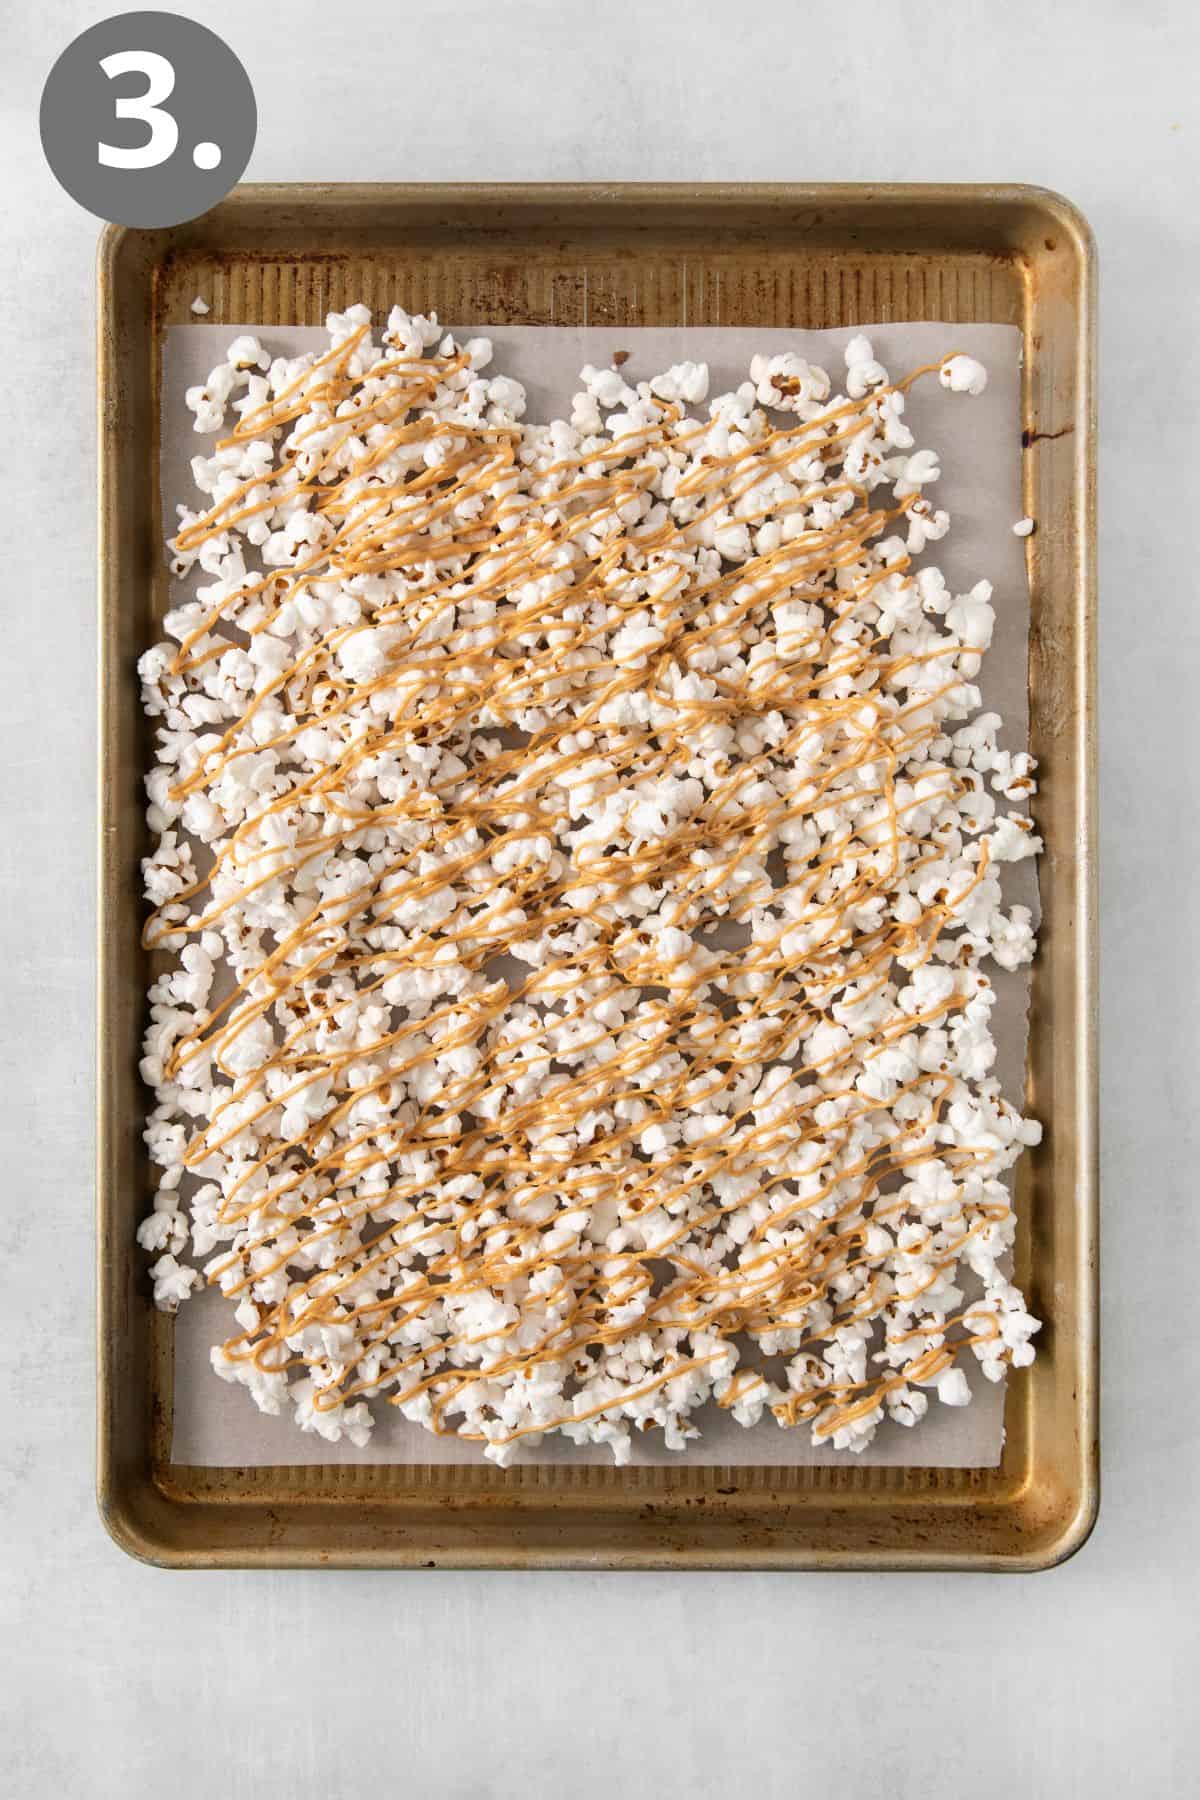 Peanut butter drizzled over popcorn that is on a sheet pan